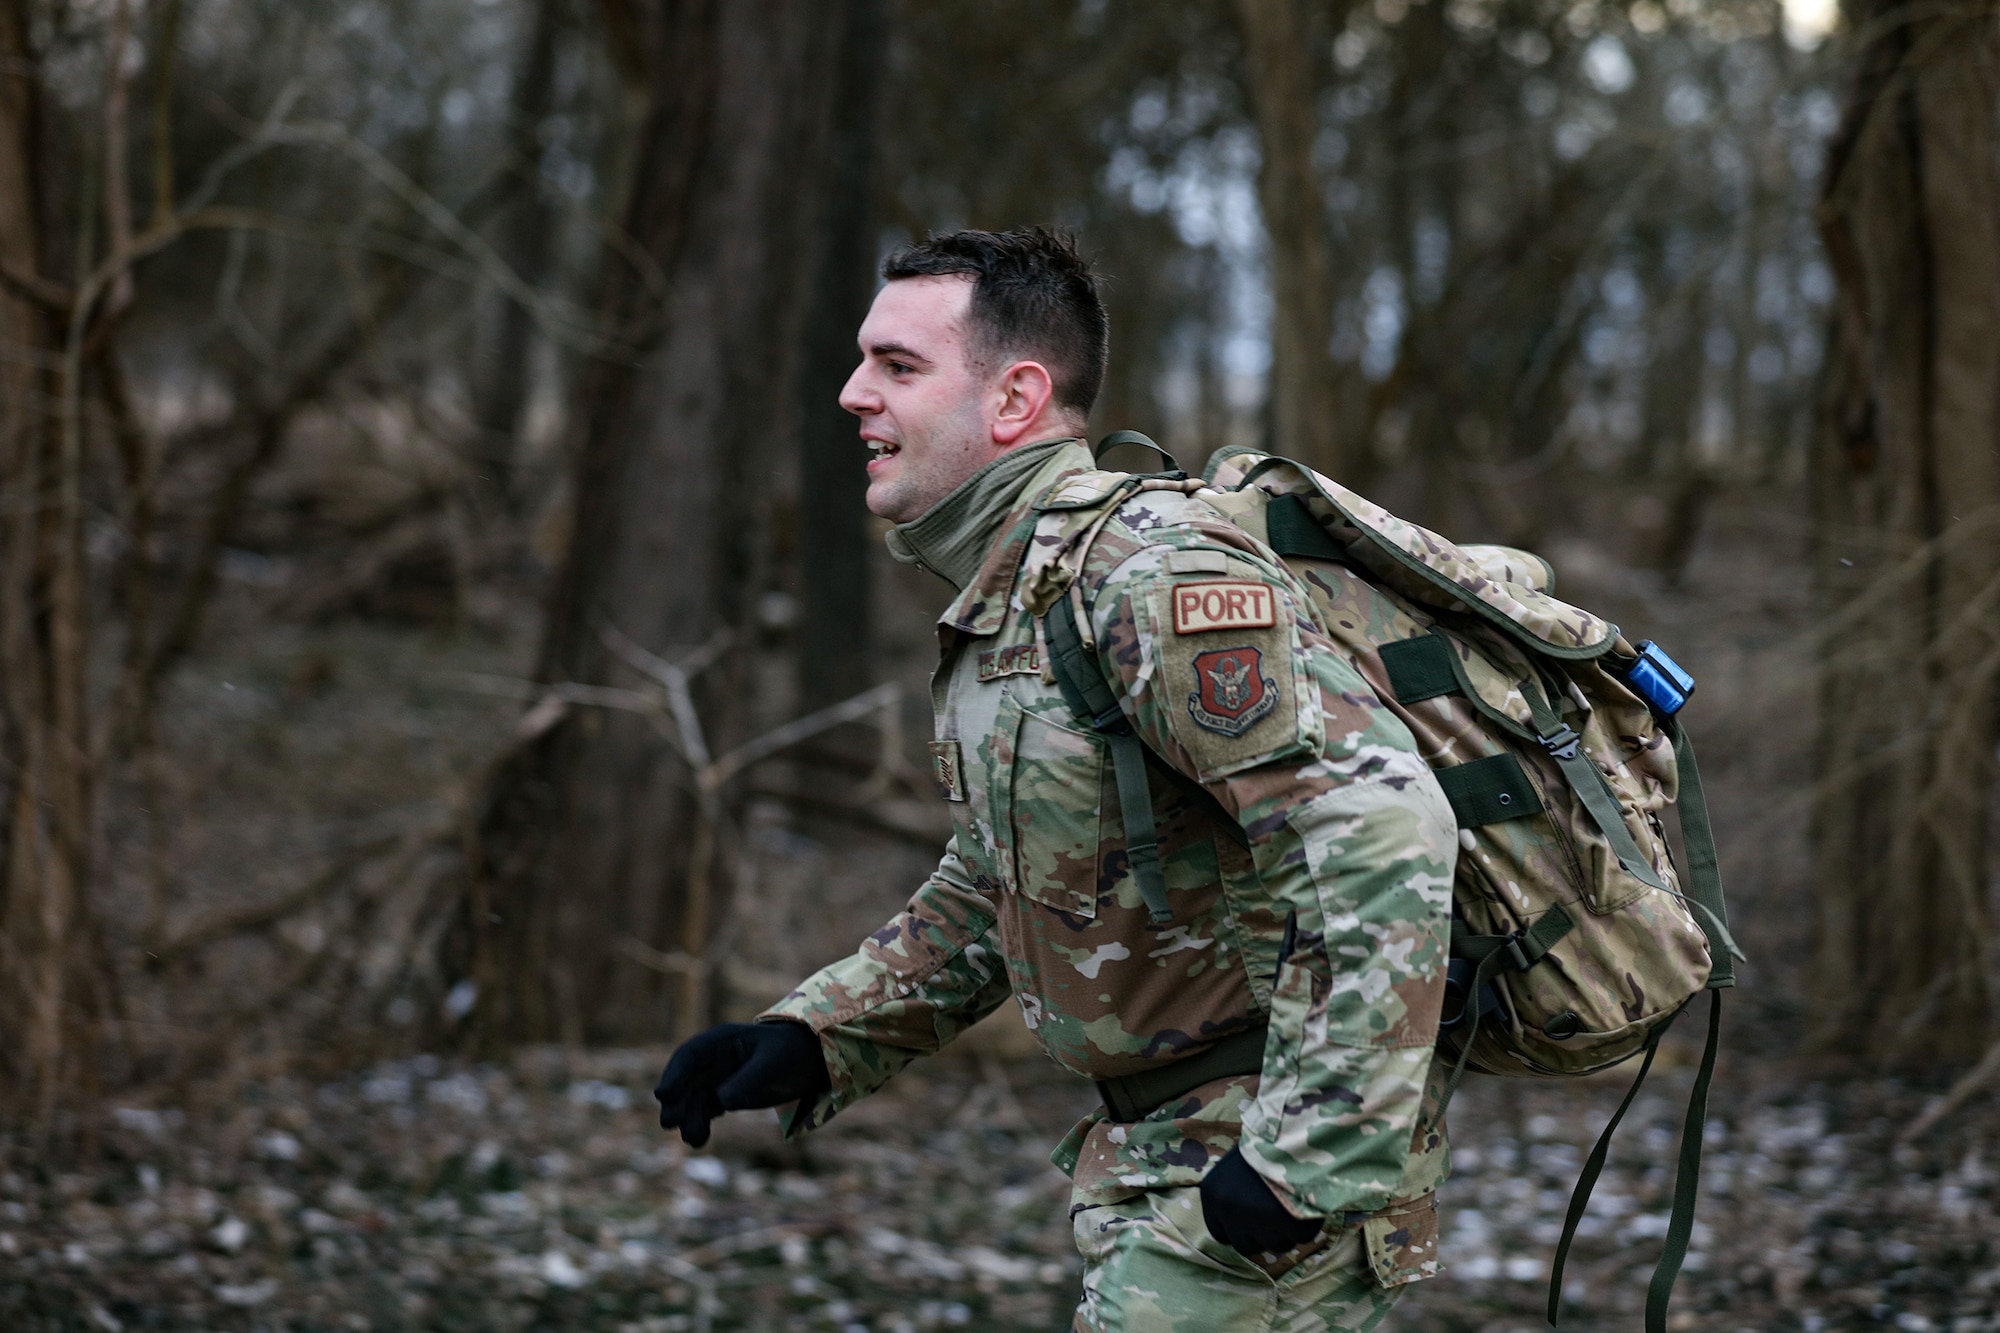 Tech. Sgt. Gabriel Clark, 87th Aerial Port Squadron ramp operations representative, pushes through a 12k ruck-march during the German Armed Forces Military Proficiency Badge qualification at Wright-Patterson Air Force Base, Ohio, Feb. 3, 2023. He finished the event with a 1:37:50 runtime.